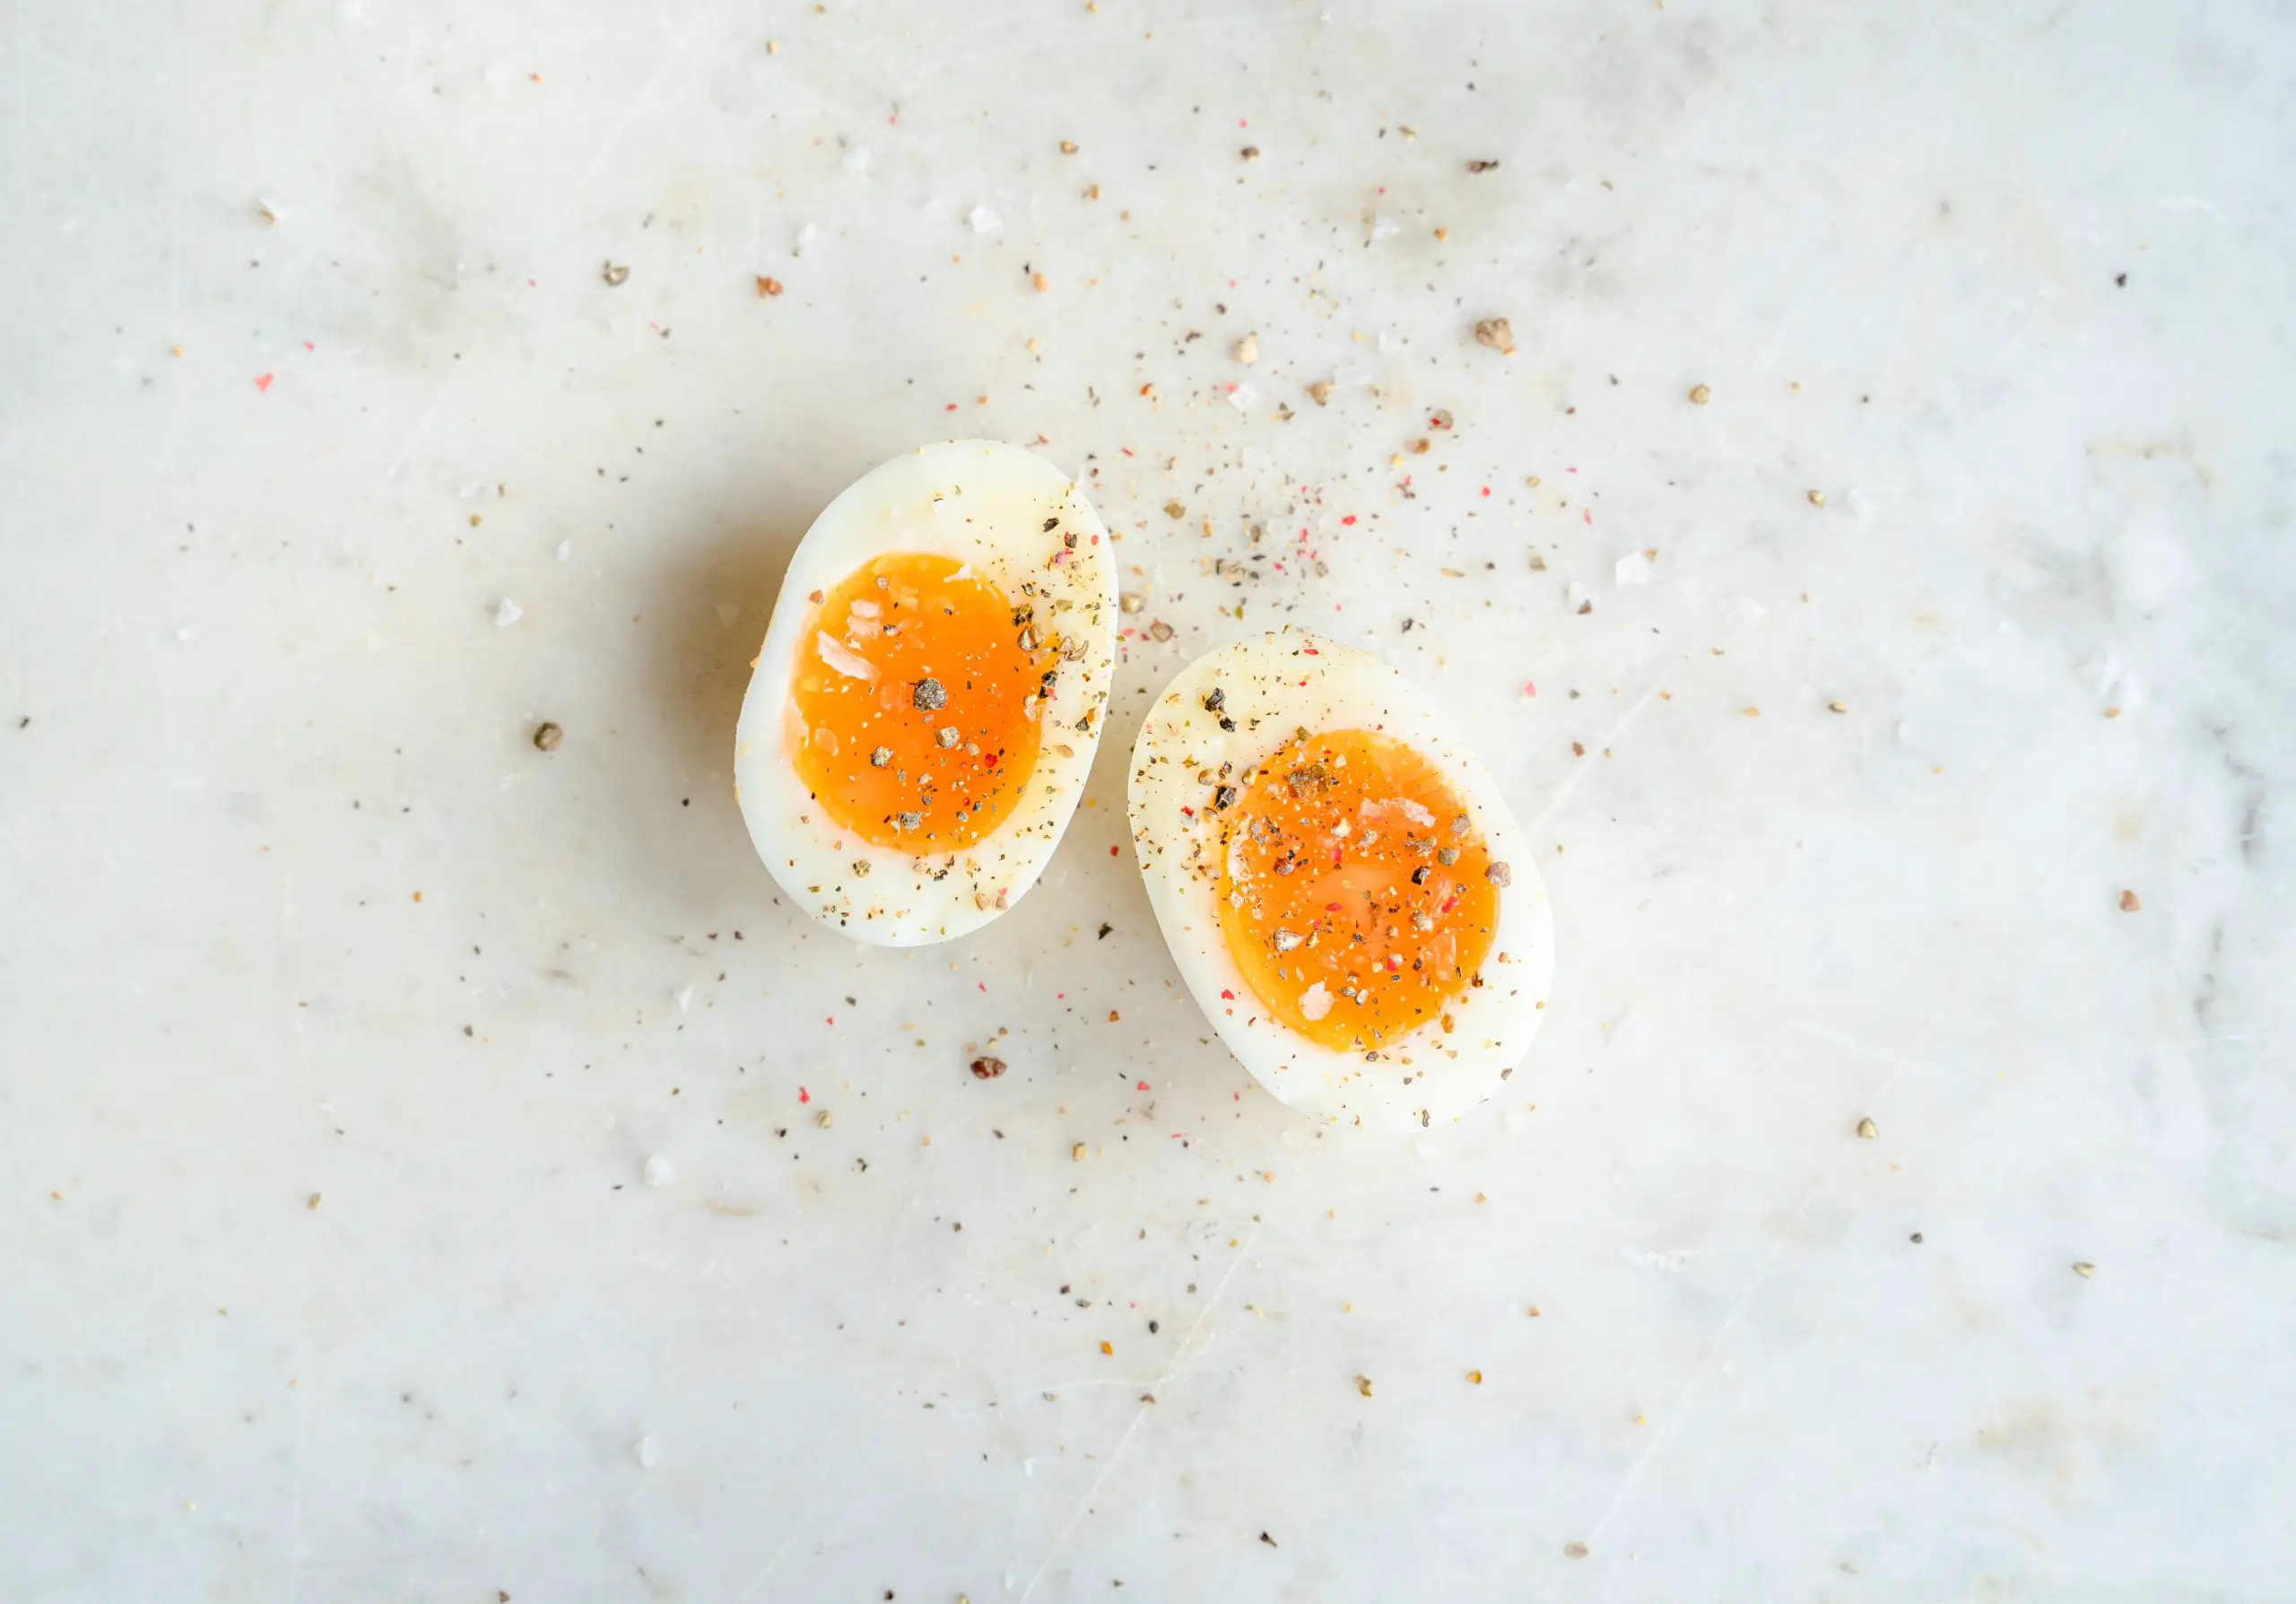 How Long Can Cooked Eggs Last in the Fridge